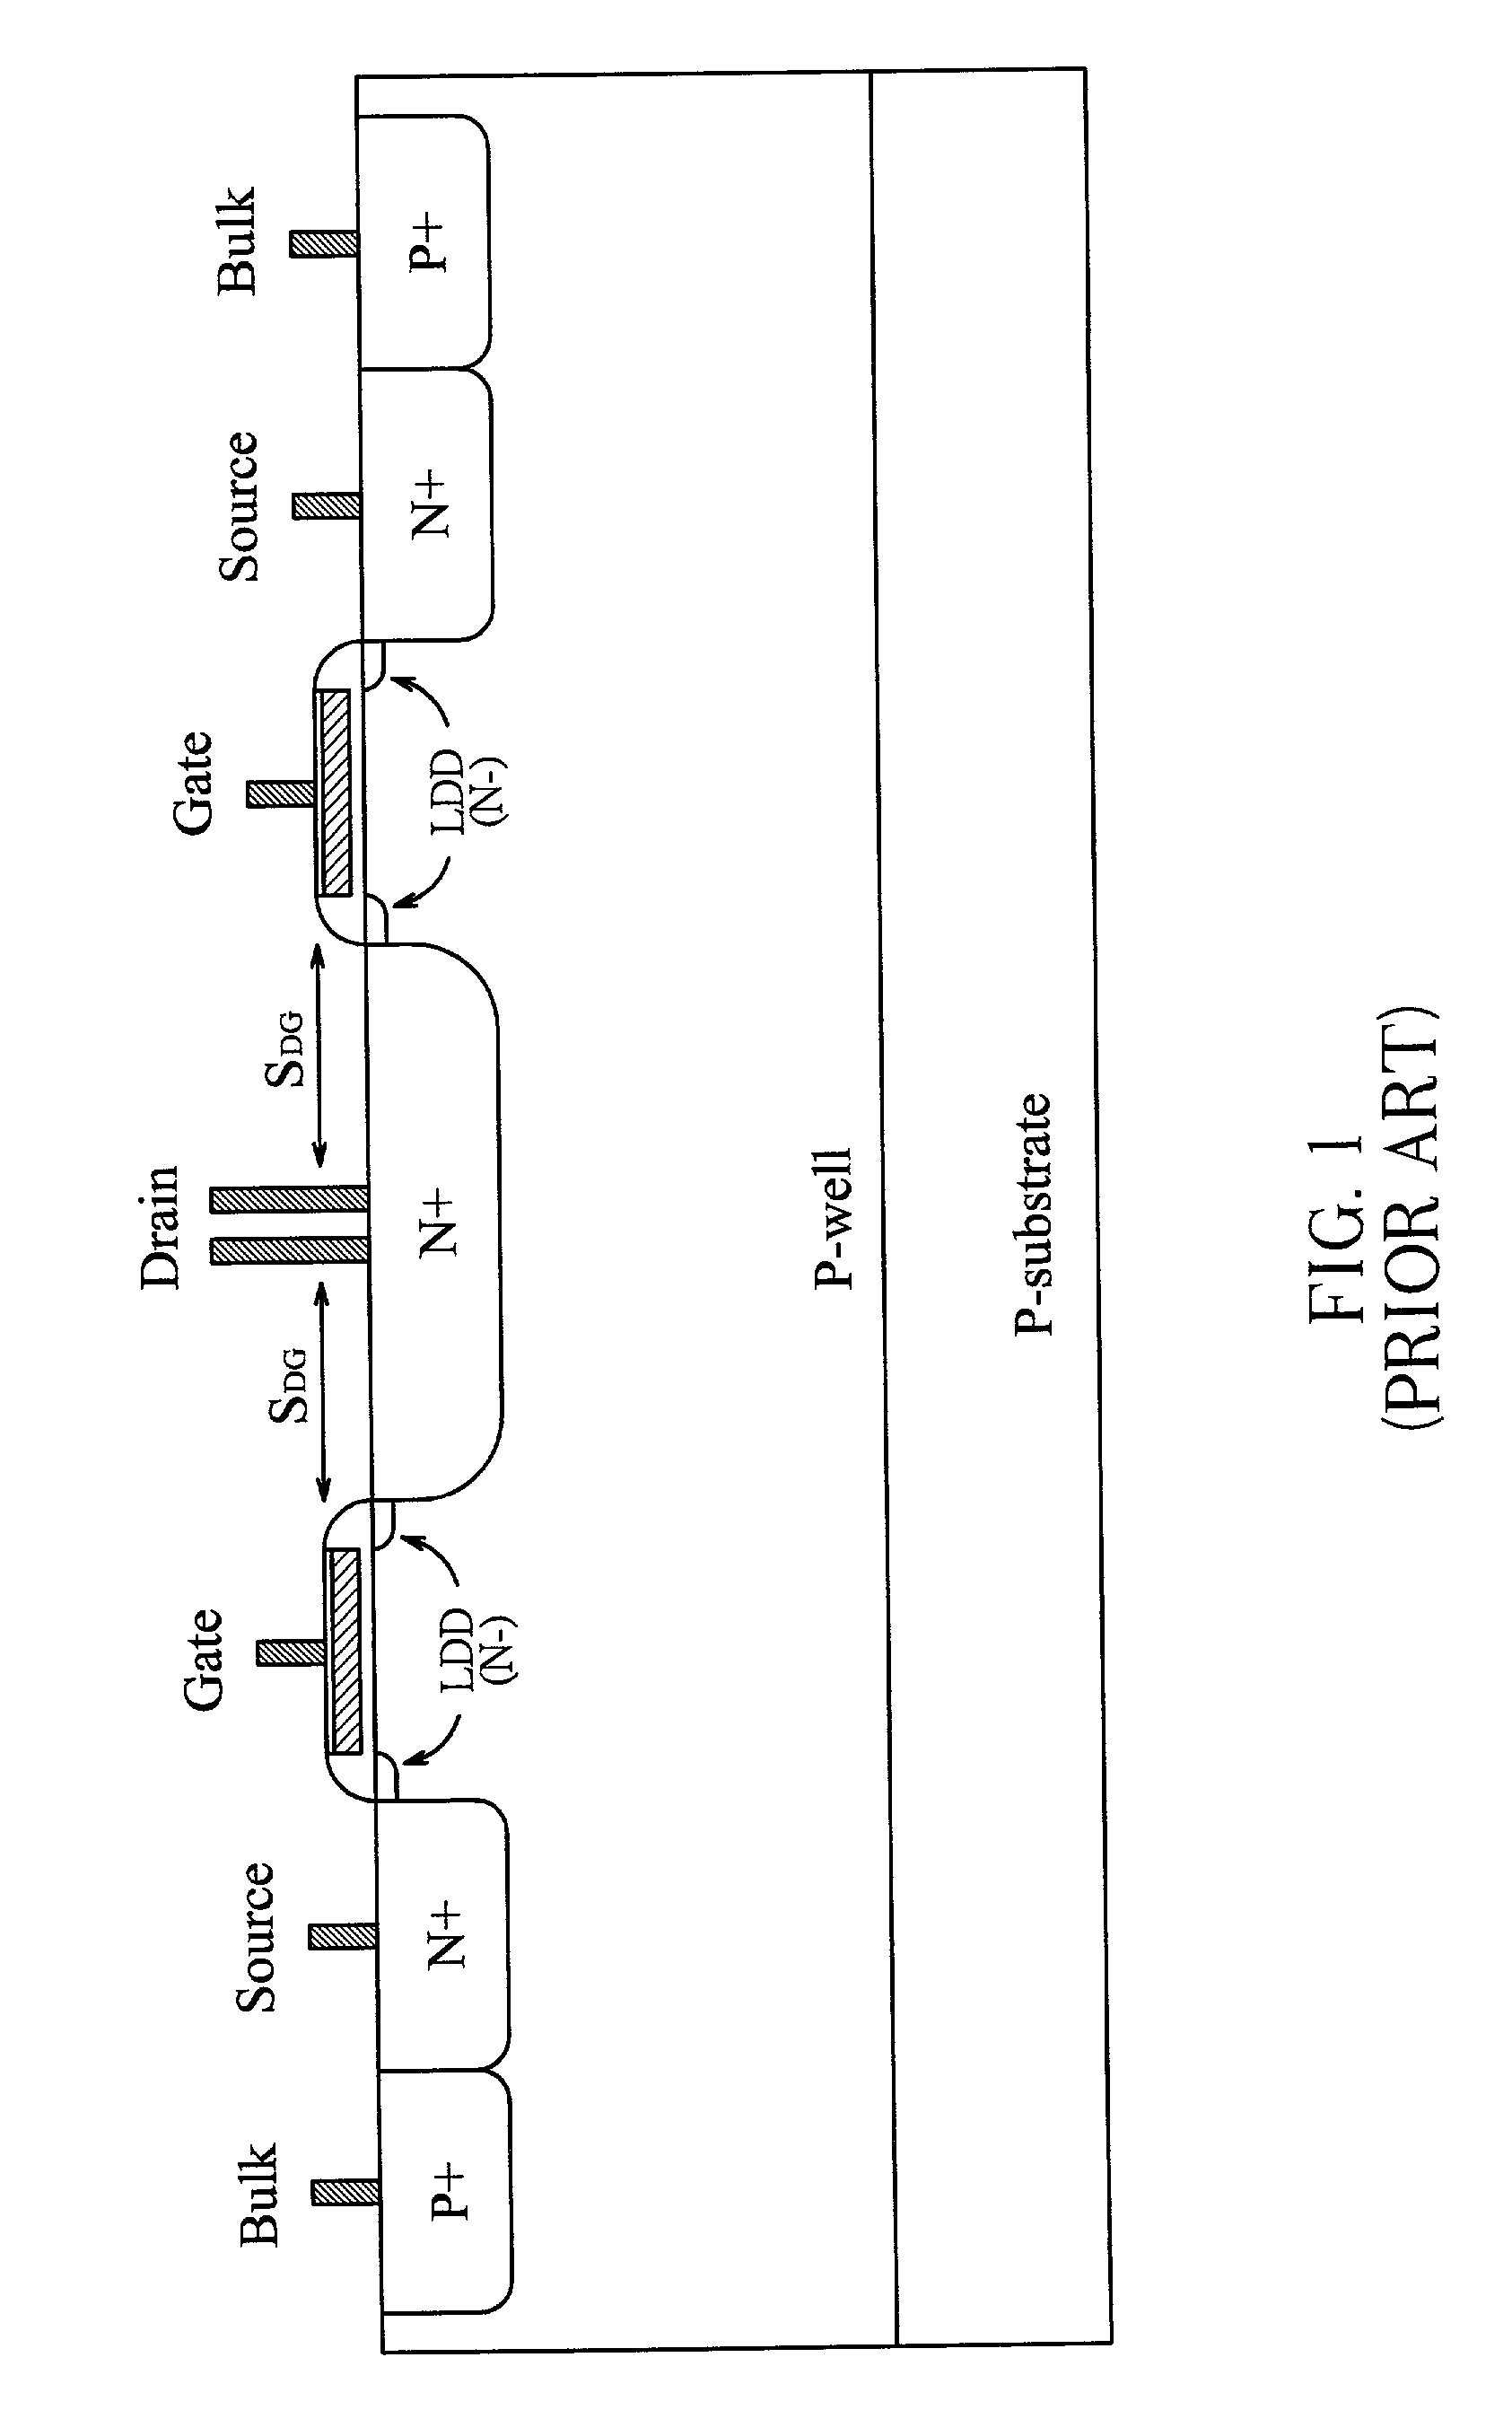 Method for manufacturing semiconductor devices having ESD protection